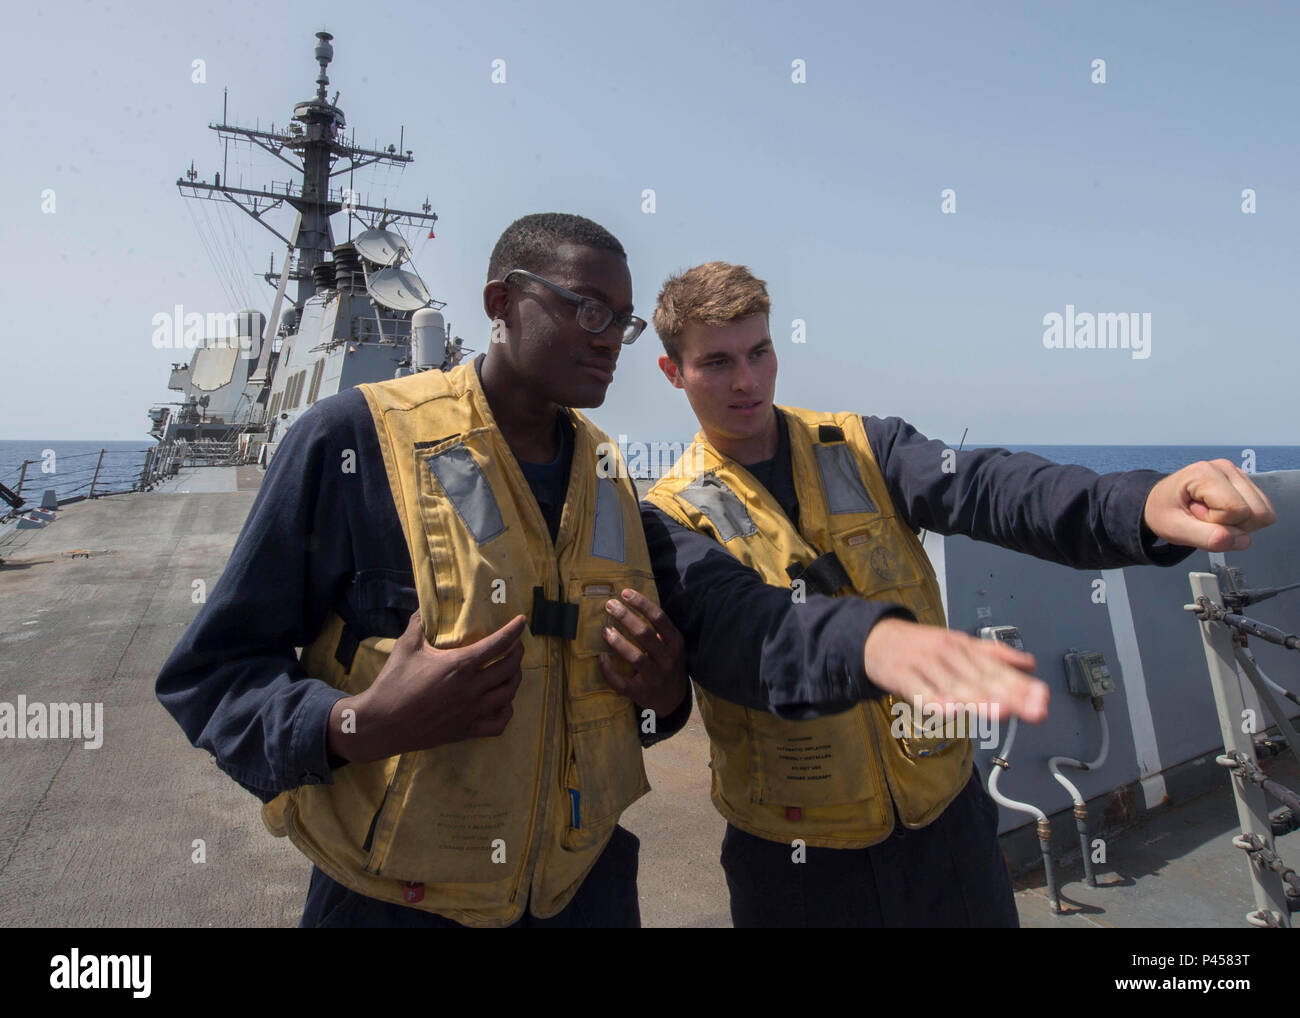 160612-N-AO823-069 RED SEA (June 12, 2016) Boatswain's Mate 2nd Class David Kostenbauder, right, trains Boatswain's Mate Seaman Jabri Singleton on landing signals before a helicopter in-flight refueling exercise aboard guided-missile destroyer USS Bulkeley (DDG 84). Bulkeley is deployed as part of the Harry S. Truman Carrier Strike Group in support of Operation Inherent Resolve, maritime security operations, and theater security cooperation efforts in the U.S. 5th Fleet area of operations. (U.S. Navy photo by Mass Communication Specialist 2nd Class Michael J. Lieberknecht/Released) Stock Photo